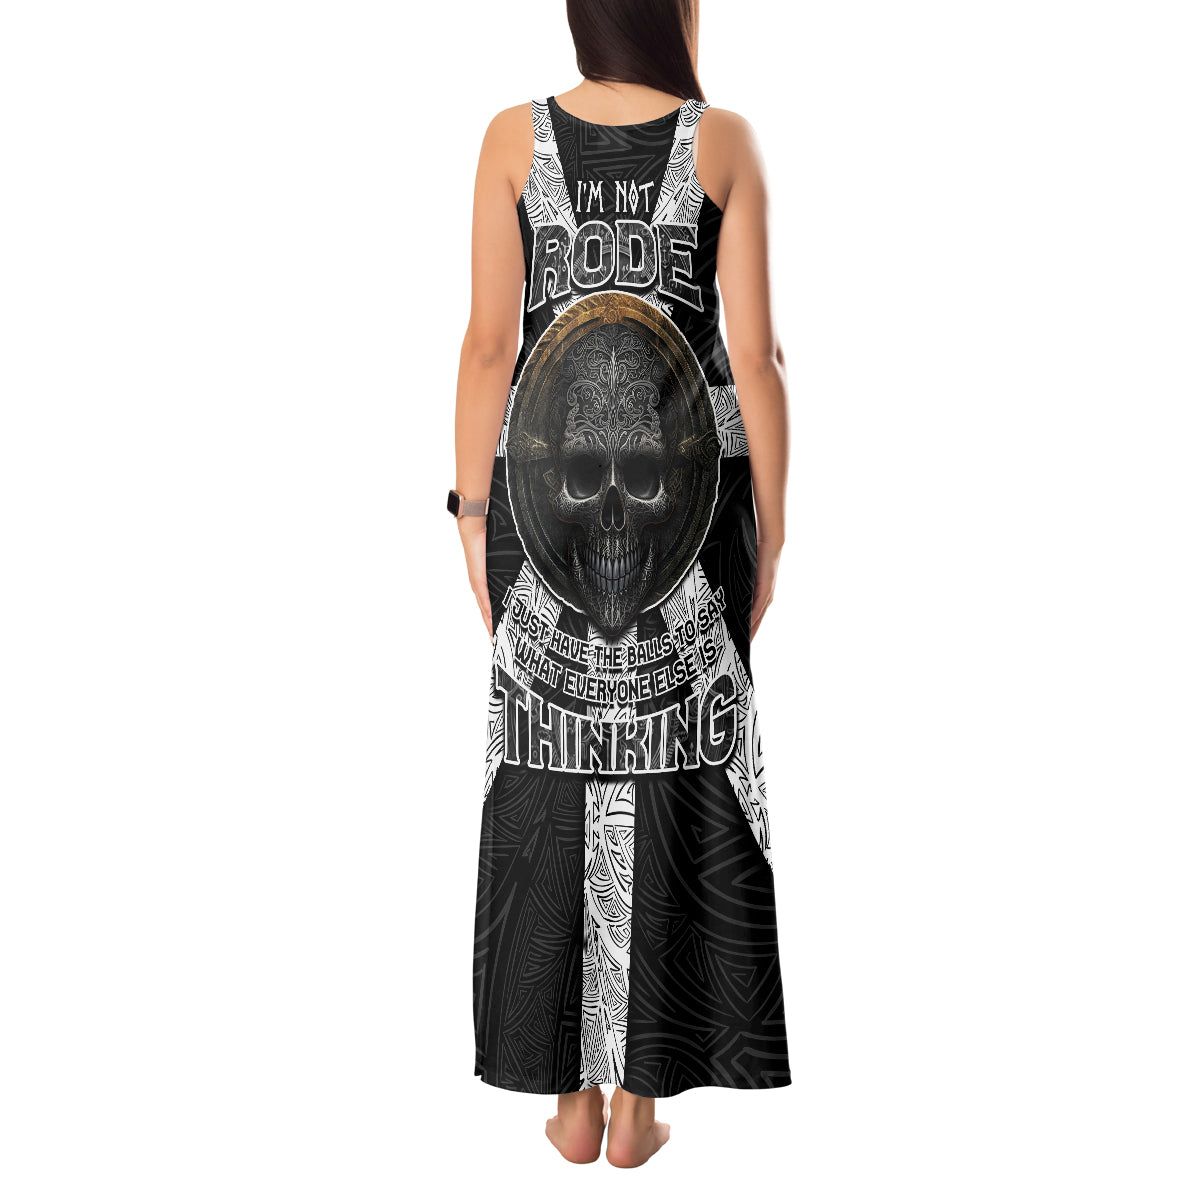 hell-pattern-skull-tank-maxi-dress-im-not-rode-i-just-hace-the-balls-to-say-what-everyone-else-is-thinking